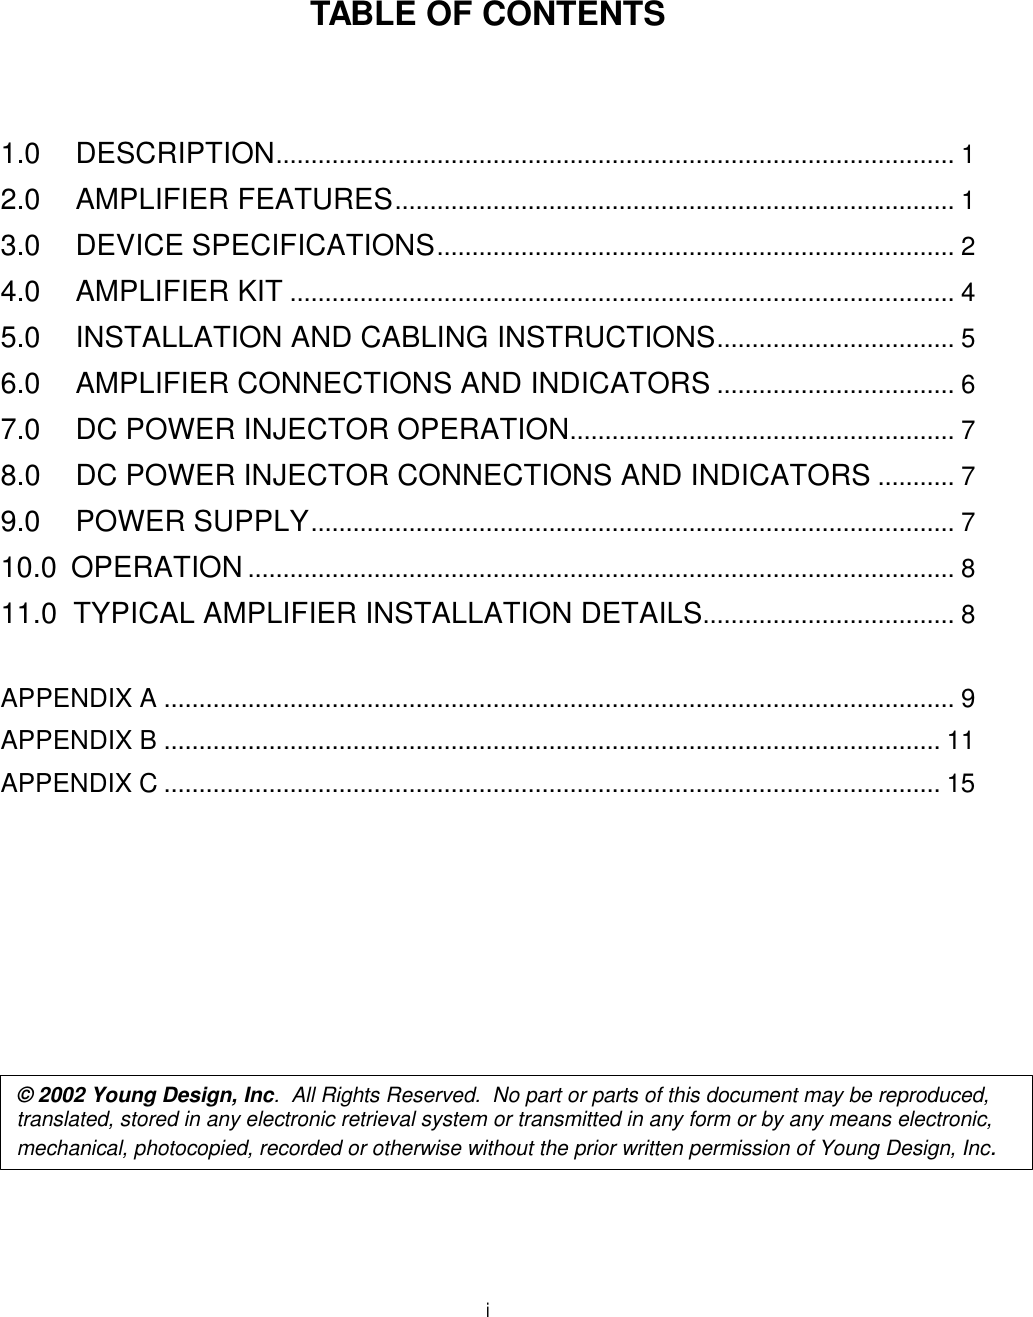  i    TABLE OF CONTENTS    1.0 DESCRIPTION................................................................................................. 1 2.0 AMPLIFIER FEATURES................................................................................ 1 3.0 DEVICE SPECIFICATIONS.......................................................................... 2 4.0 AMPLIFIER KIT ............................................................................................... 4 5.0 INSTALLATION AND CABLING INSTRUCTIONS.................................. 5 6.0 AMPLIFIER CONNECTIONS AND INDICATORS .................................. 6 7.0 DC POWER INJECTOR OPERATION....................................................... 7 8.0 DC POWER INJECTOR CONNECTIONS AND INDICATORS ........... 7 9.0 POWER SUPPLY............................................................................................ 7 10.0  OPERATION ..................................................................................................... 8 11.0  TYPICAL AMPLIFIER INSTALLATION DETAILS.................................... 8  APPENDIX A ................................................................................................................. 9 APPENDIX B ............................................................................................................... 11 APPENDIX C ............................................................................................................... 15               © 2002 Young Design, Inc.  All Rights Reserved.  No part or parts of this document may be reproduced, translated, stored in any electronic retrieval system or transmitted in any form or by any means electronic, mechanical, photocopied, recorded or otherwise without the prior written permission of Young Design, Inc. 